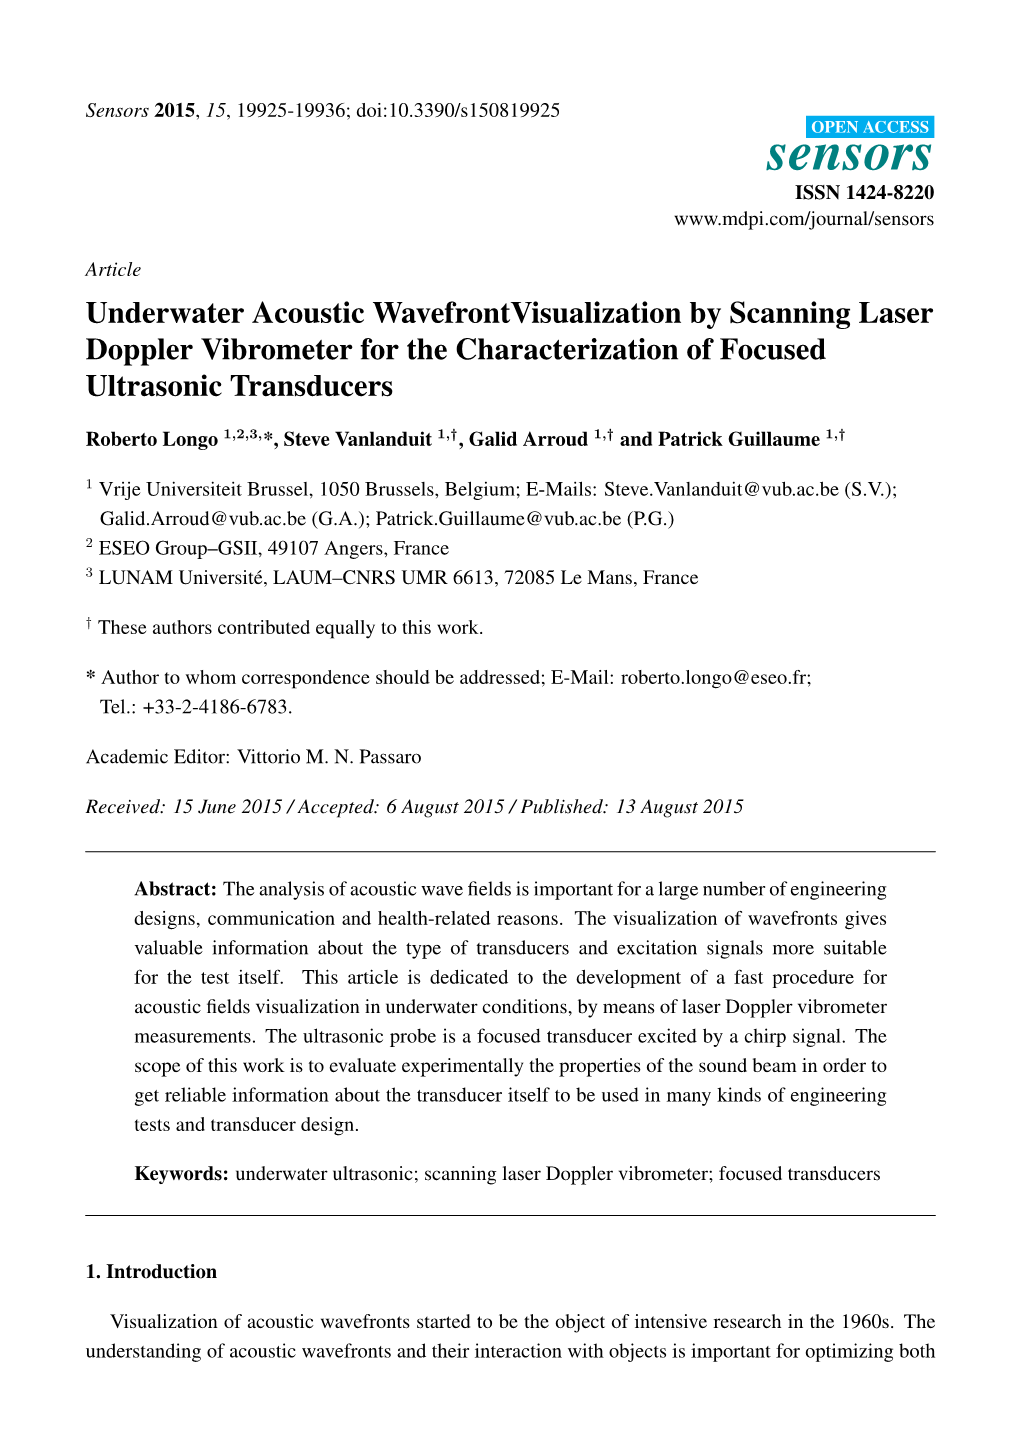 Underwater Acoustic Wavefrontvisualization by Scanning Laser Doppler Vibrometer for the Characterization of Focused Ultrasonic Transducers